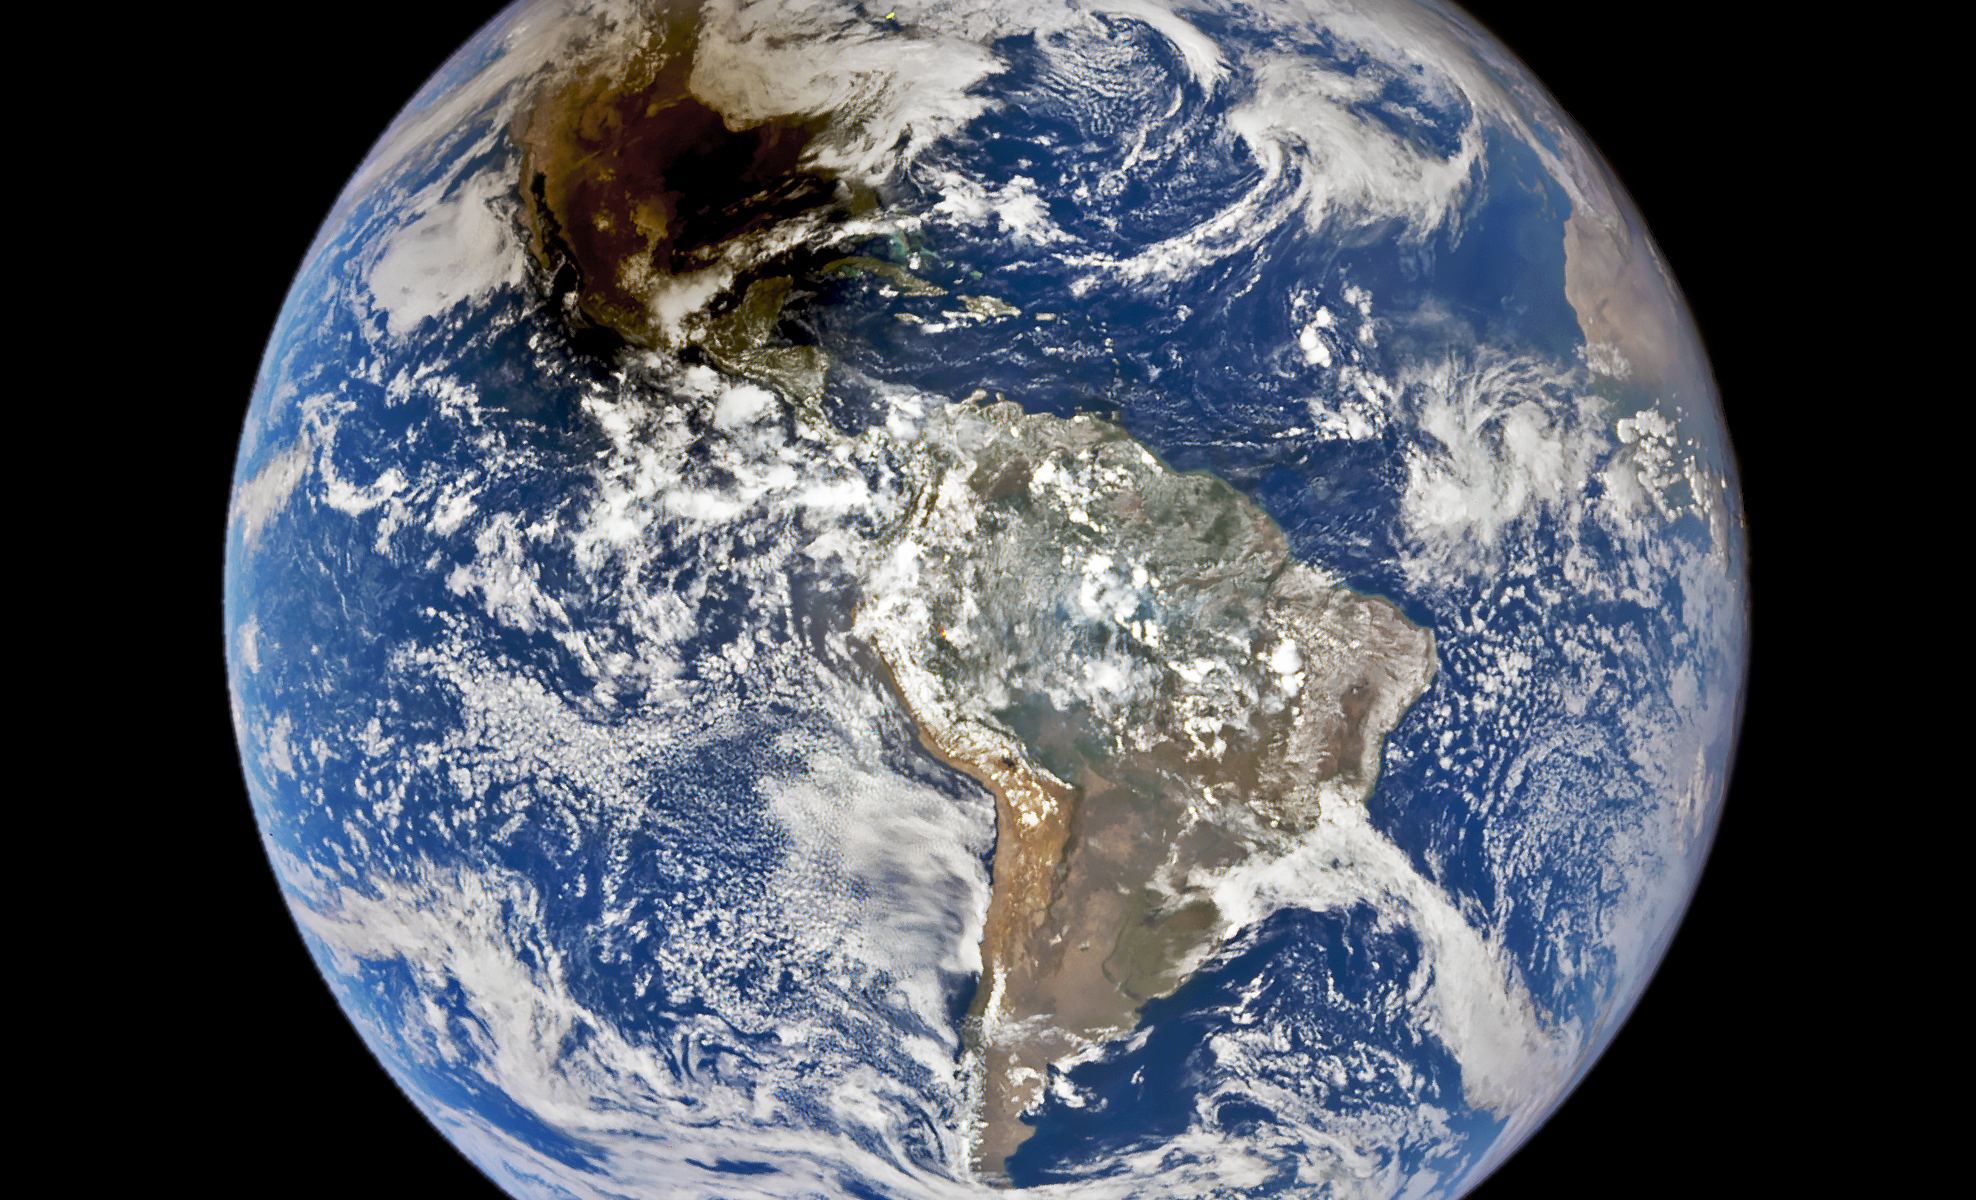 As the Moon crossed between the Sun and Earth during the 2023 annular eclipse, its shadow darkened skies across the United States. NASA image courtesy of the DSCOVR EPIC team.